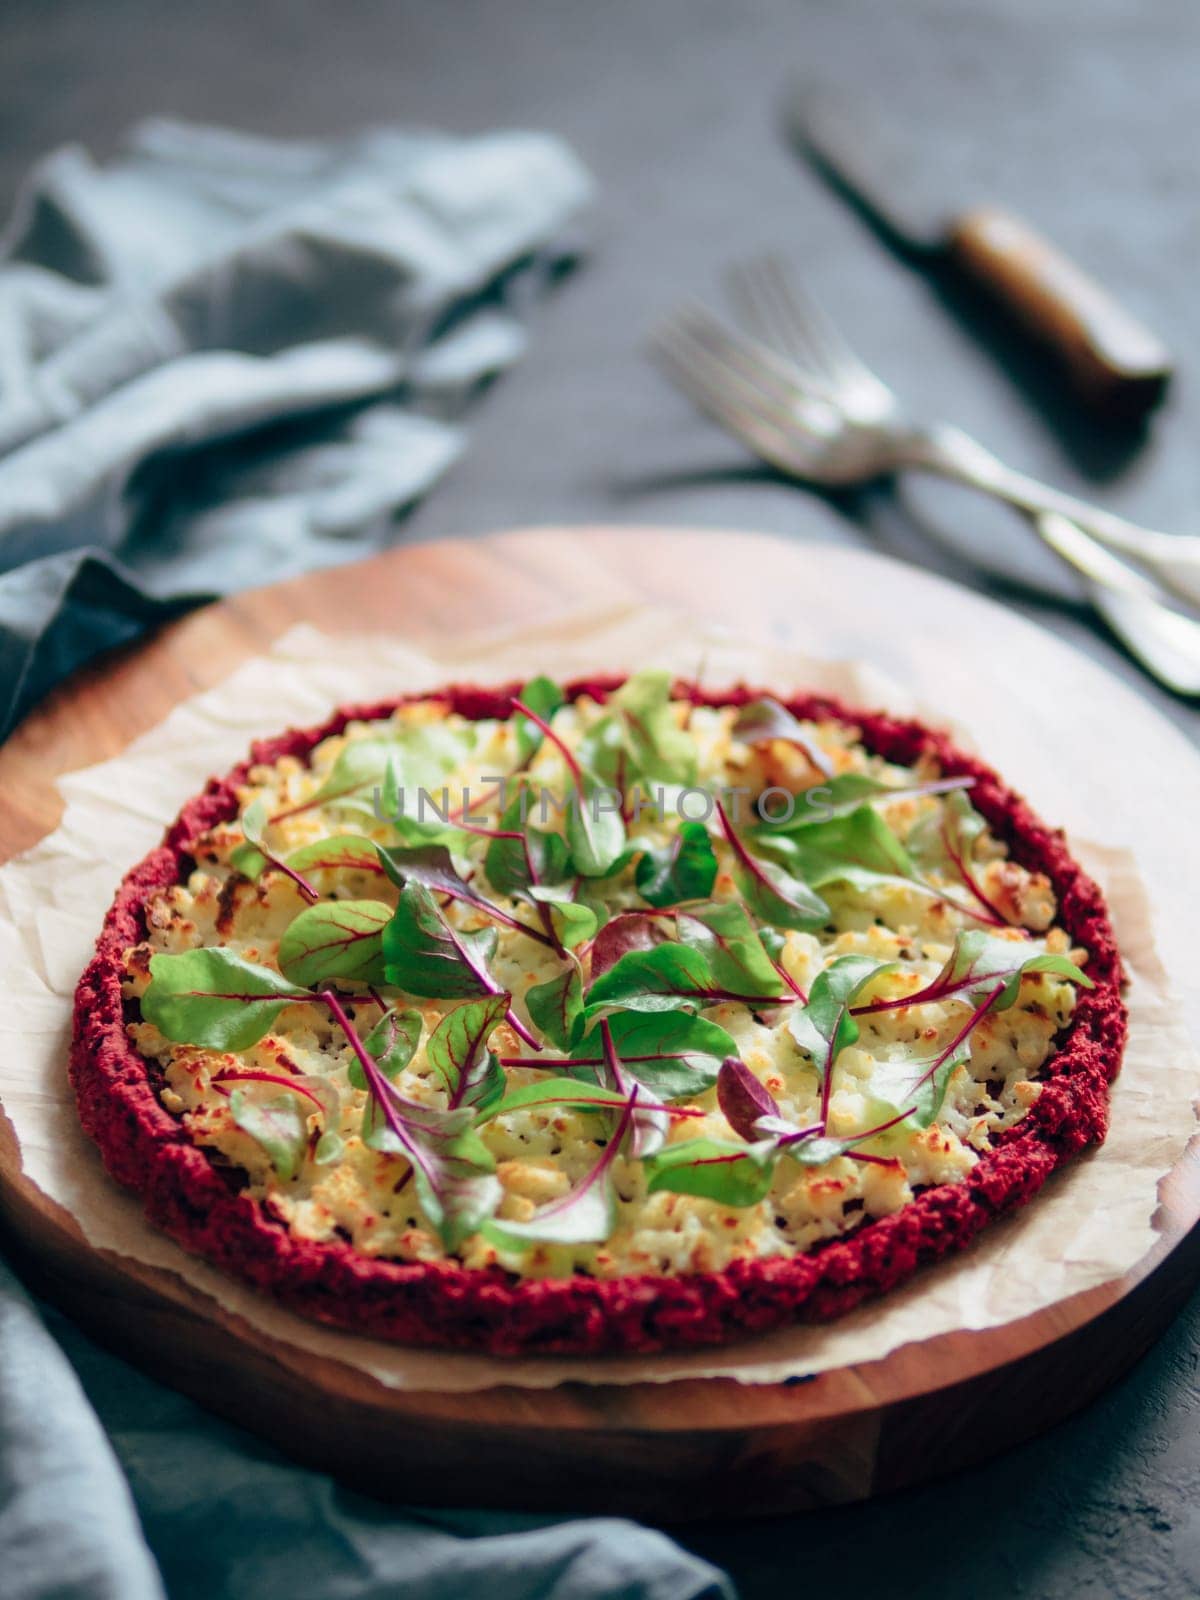 beetroot pizza crust with fresh mangold leaves by fascinadora